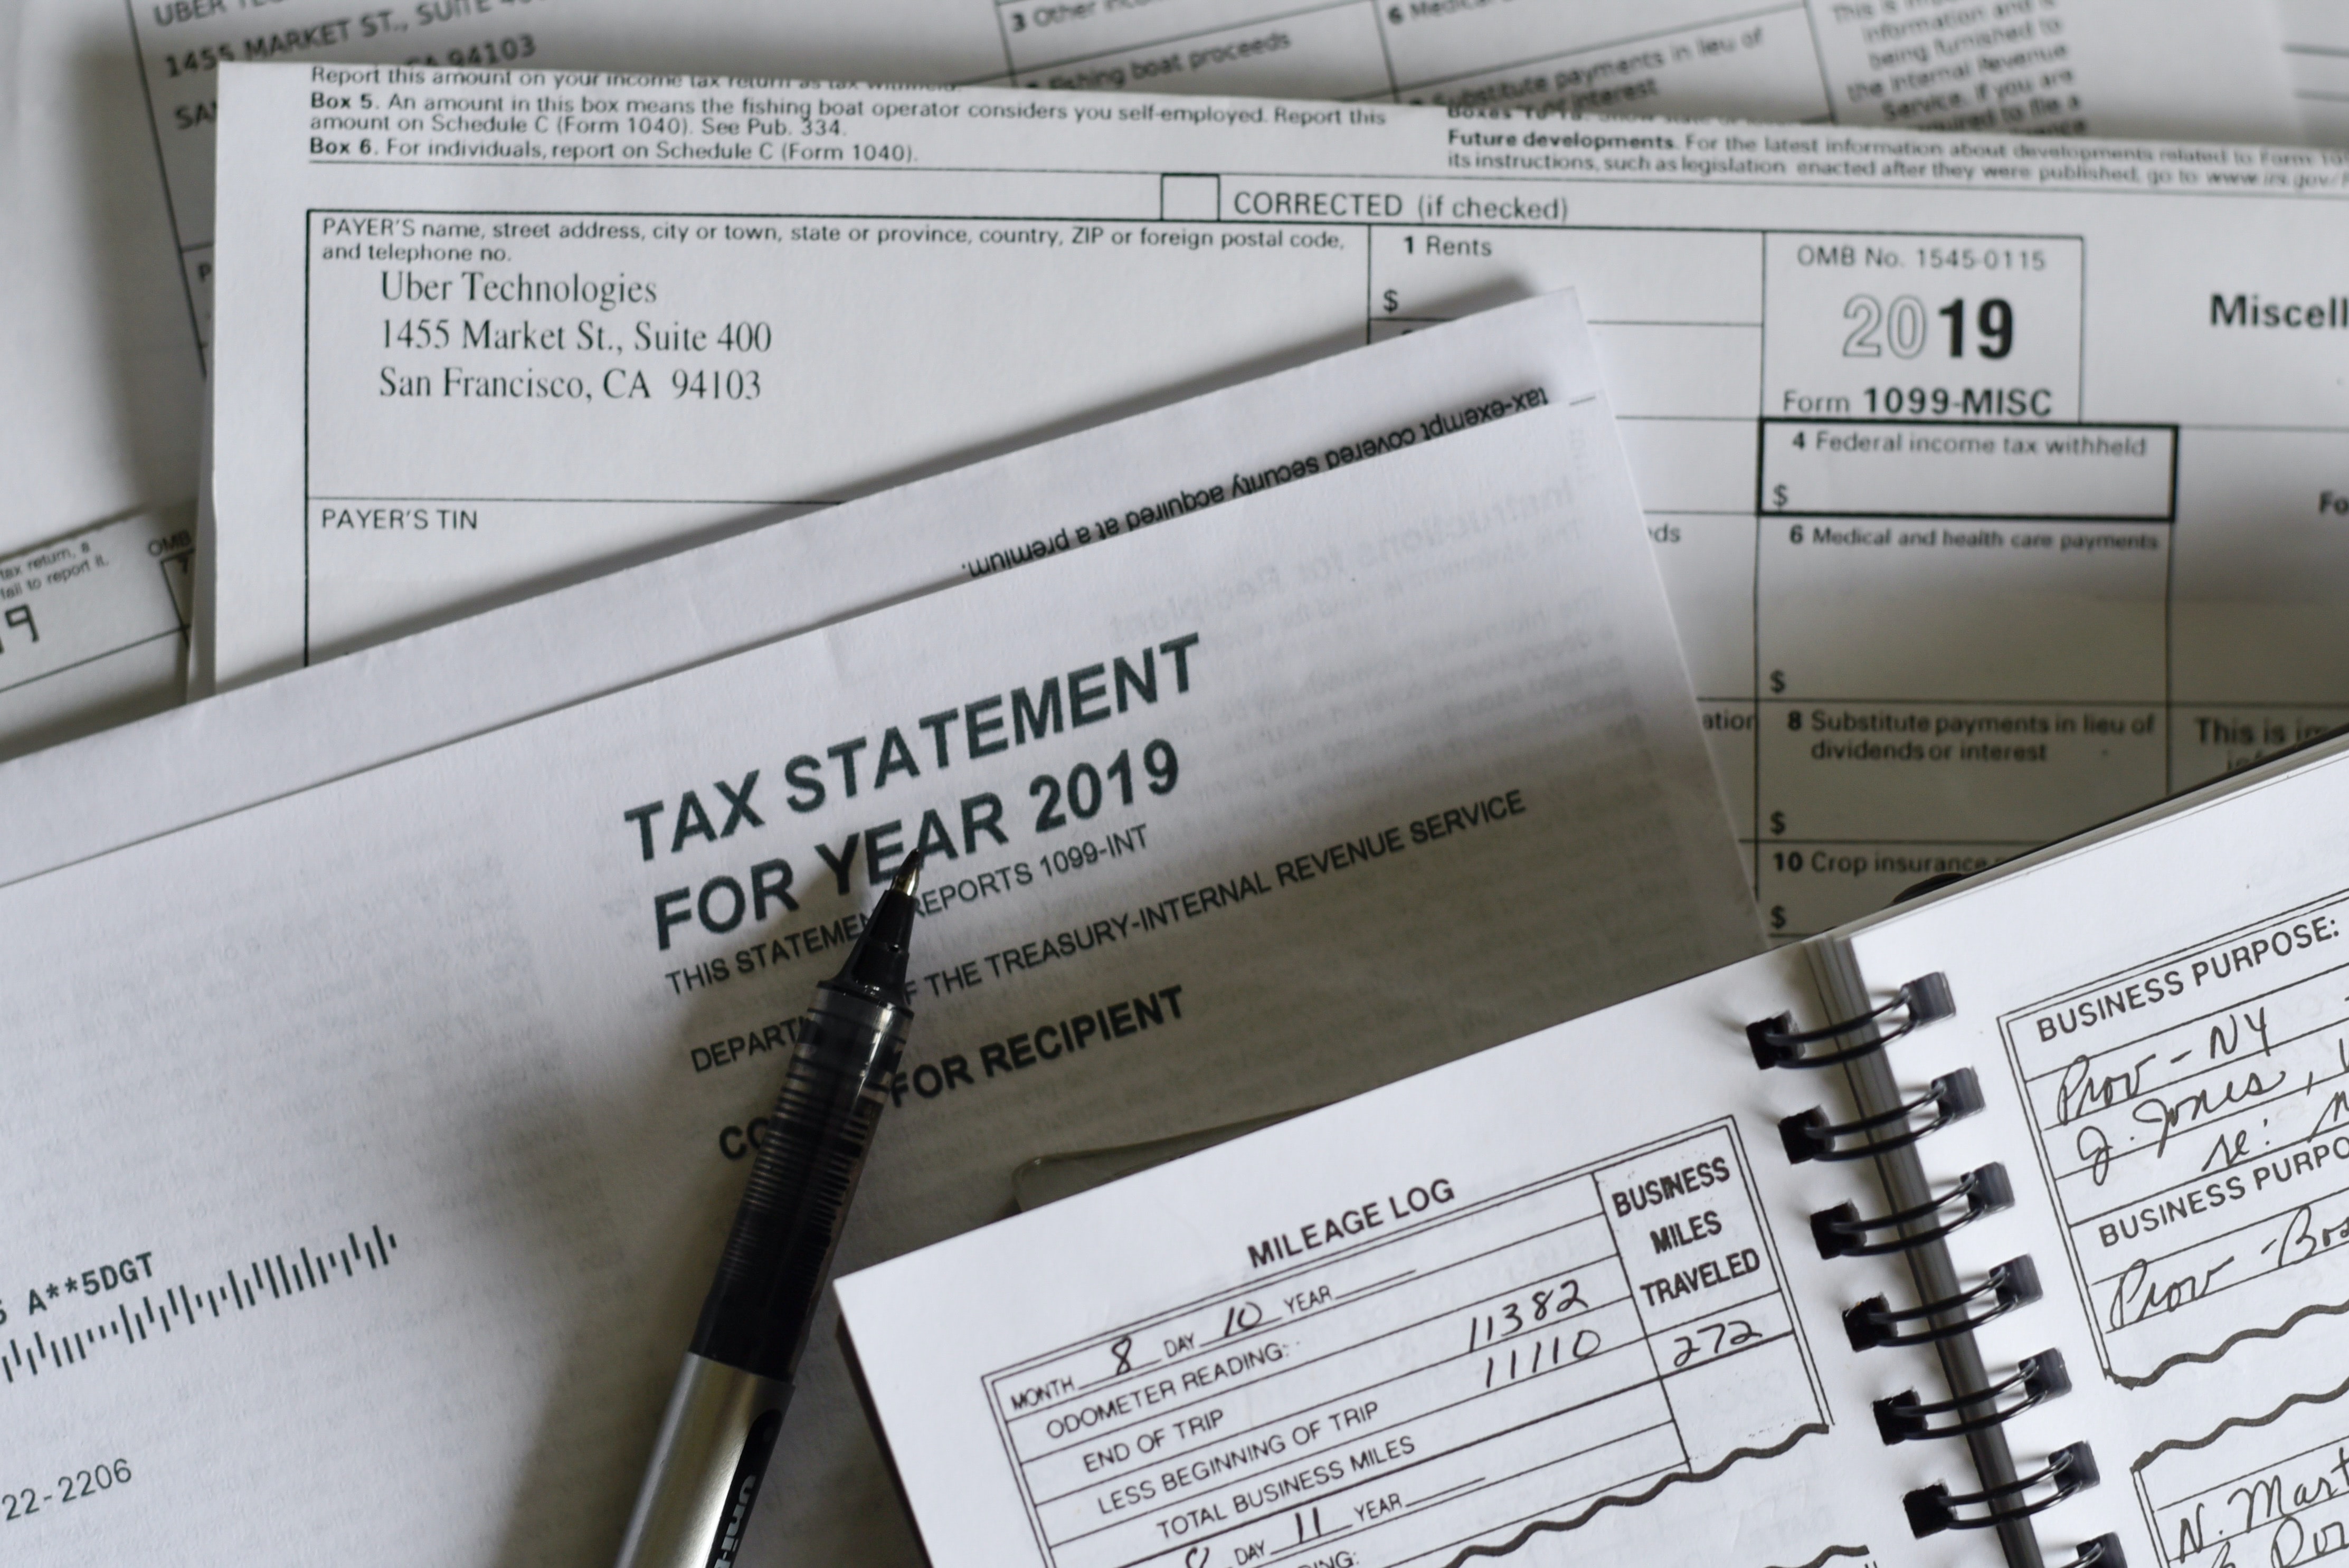 Independent contractor's tax paperwork; image by Olga DeLawrence, via Unsplash.com.